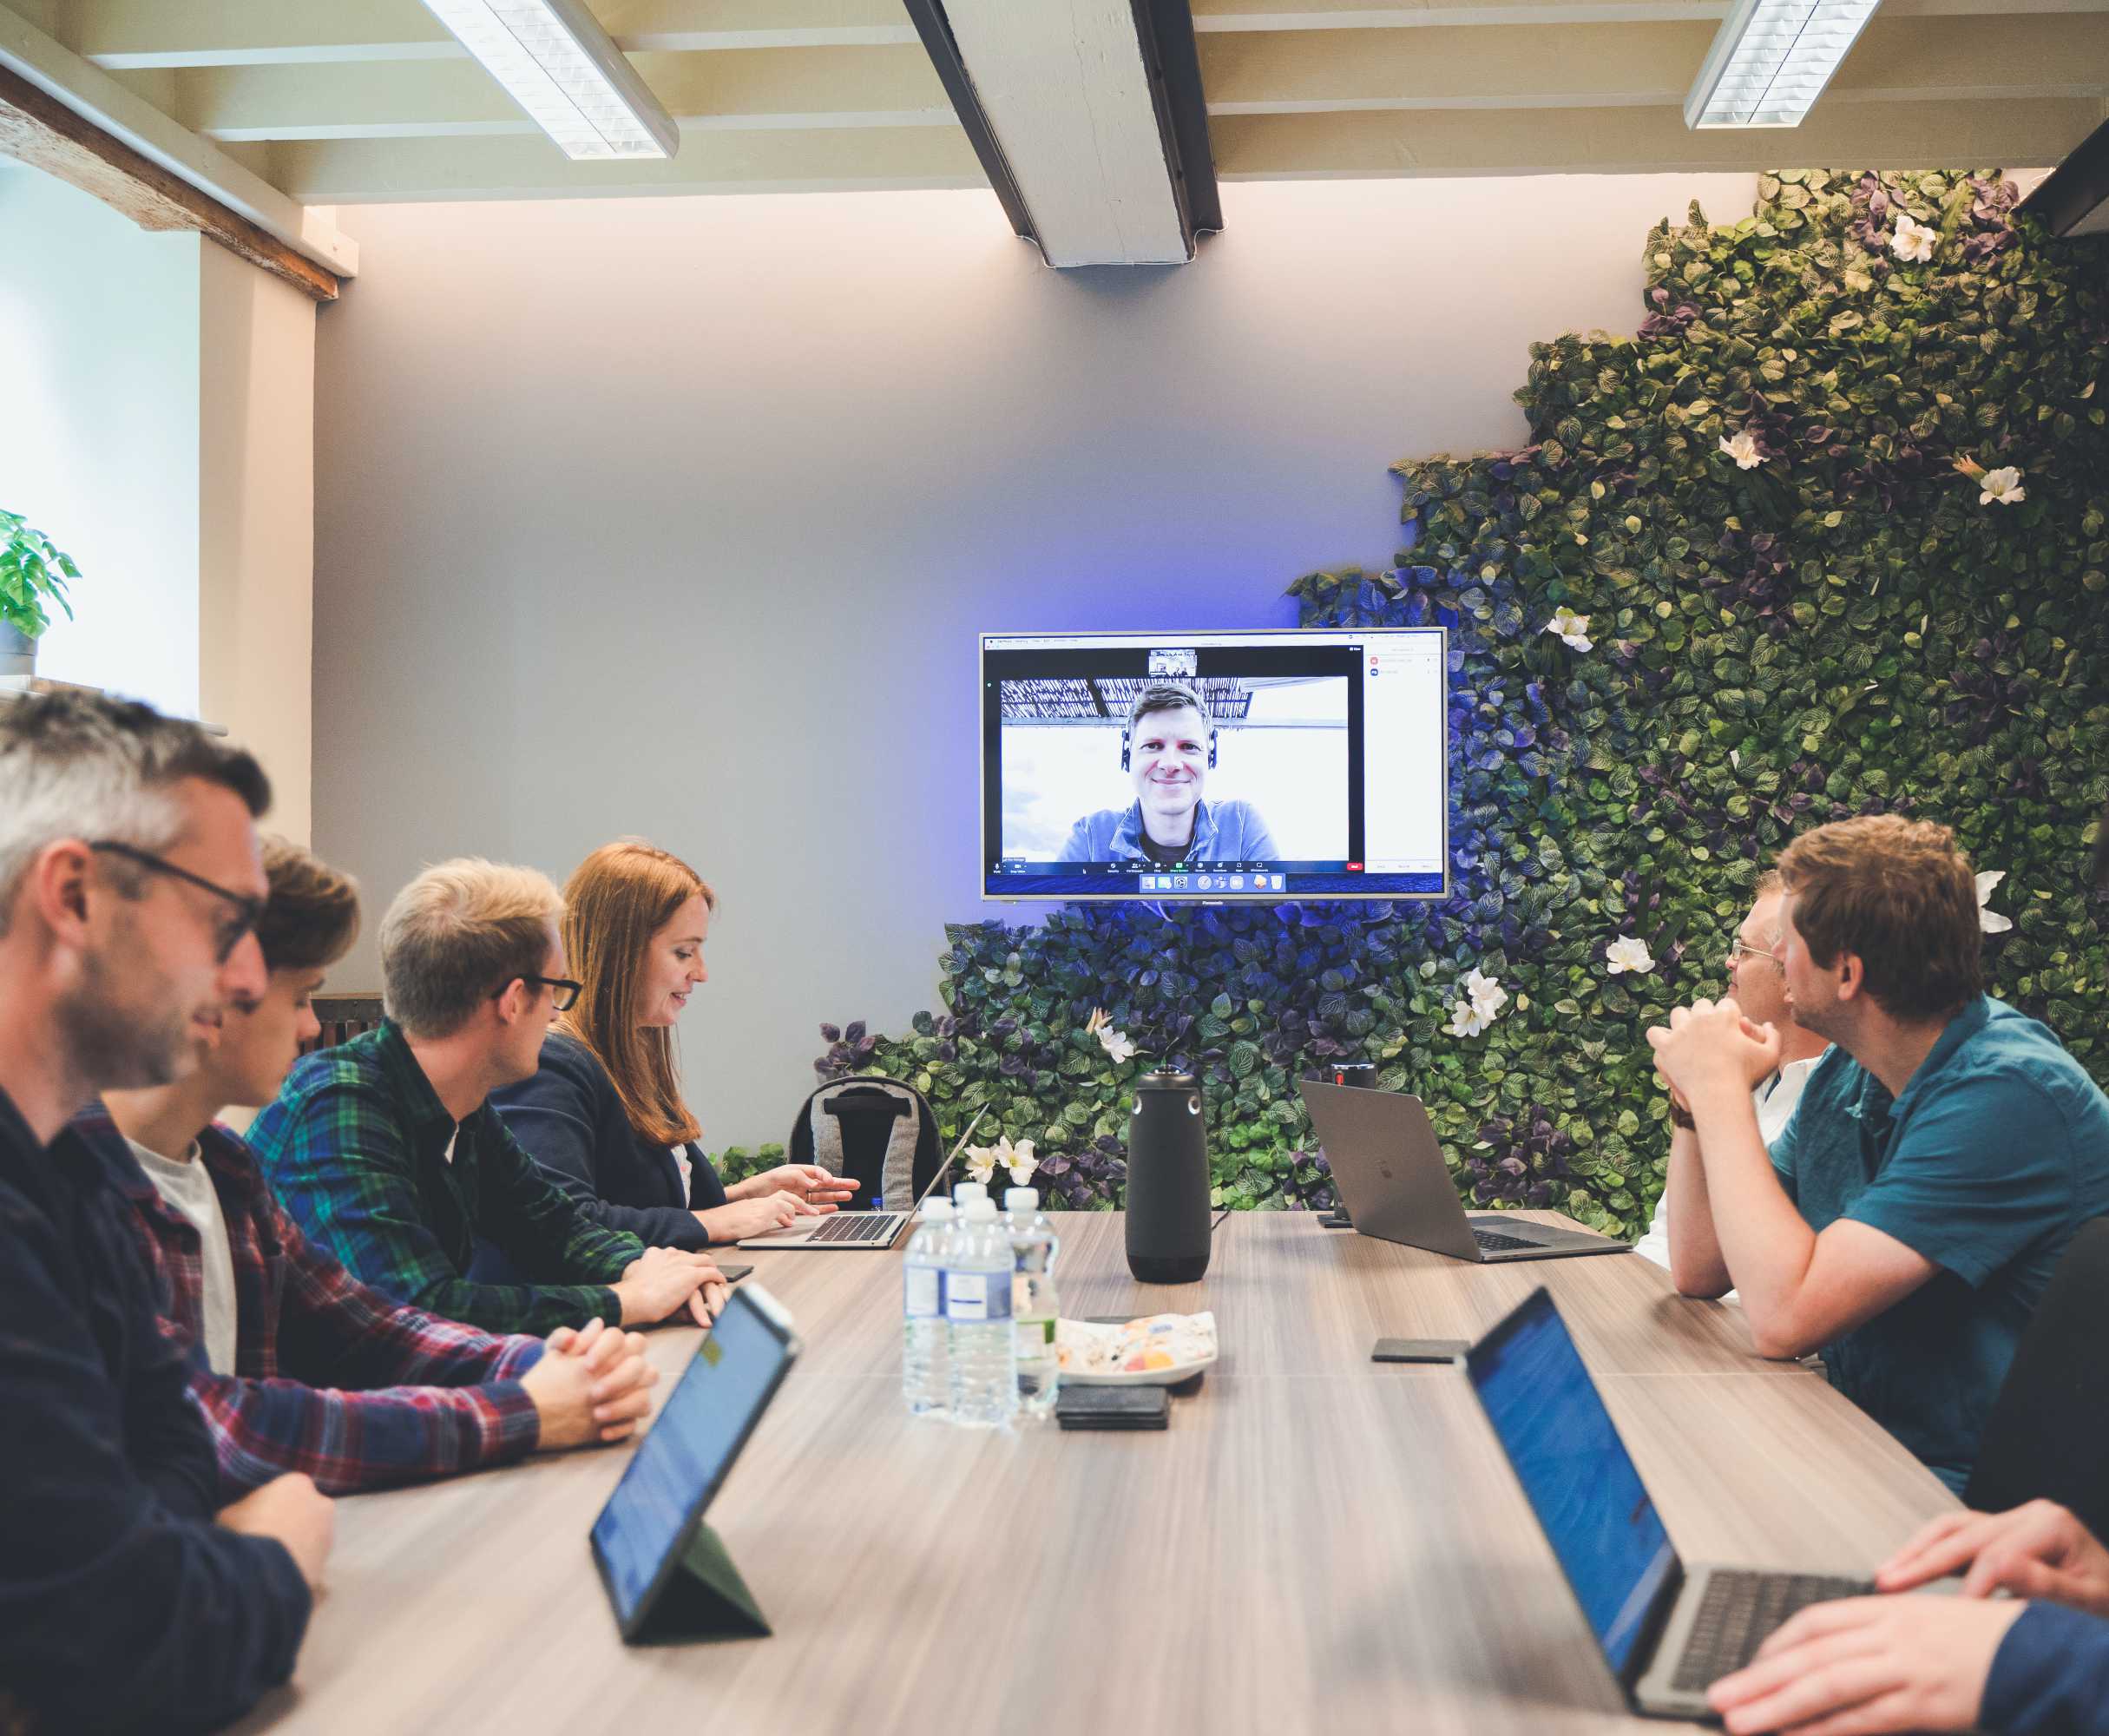 A web development team conduct a video call meeting with a colleague around a large desk. Their colleague is appearing remotely via a screen mounted on a plant-covered feature wall.